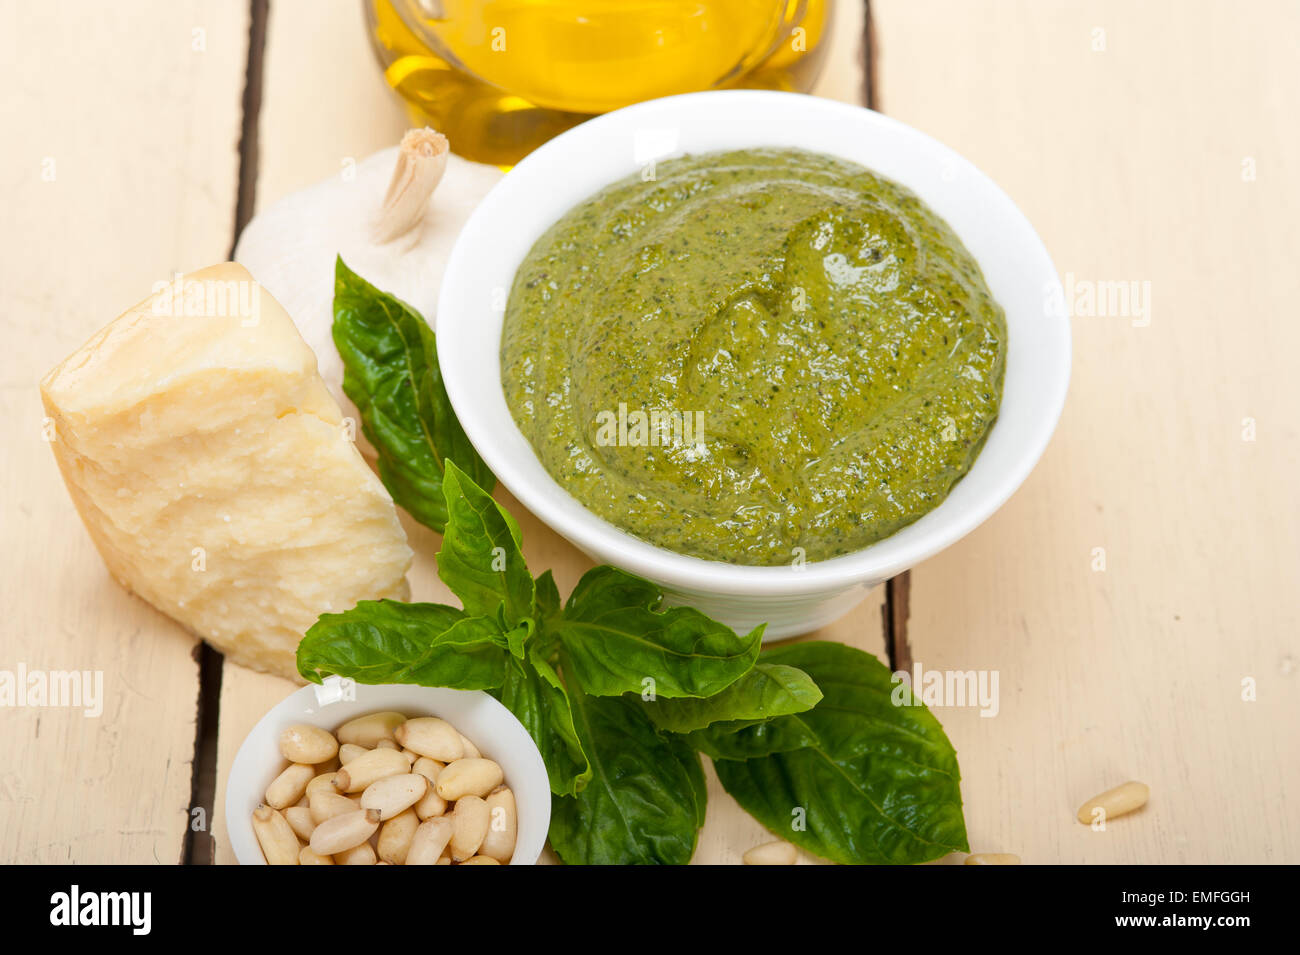 Italian traditional basil pesto sauce ingredients on a rustic table Stock Photo